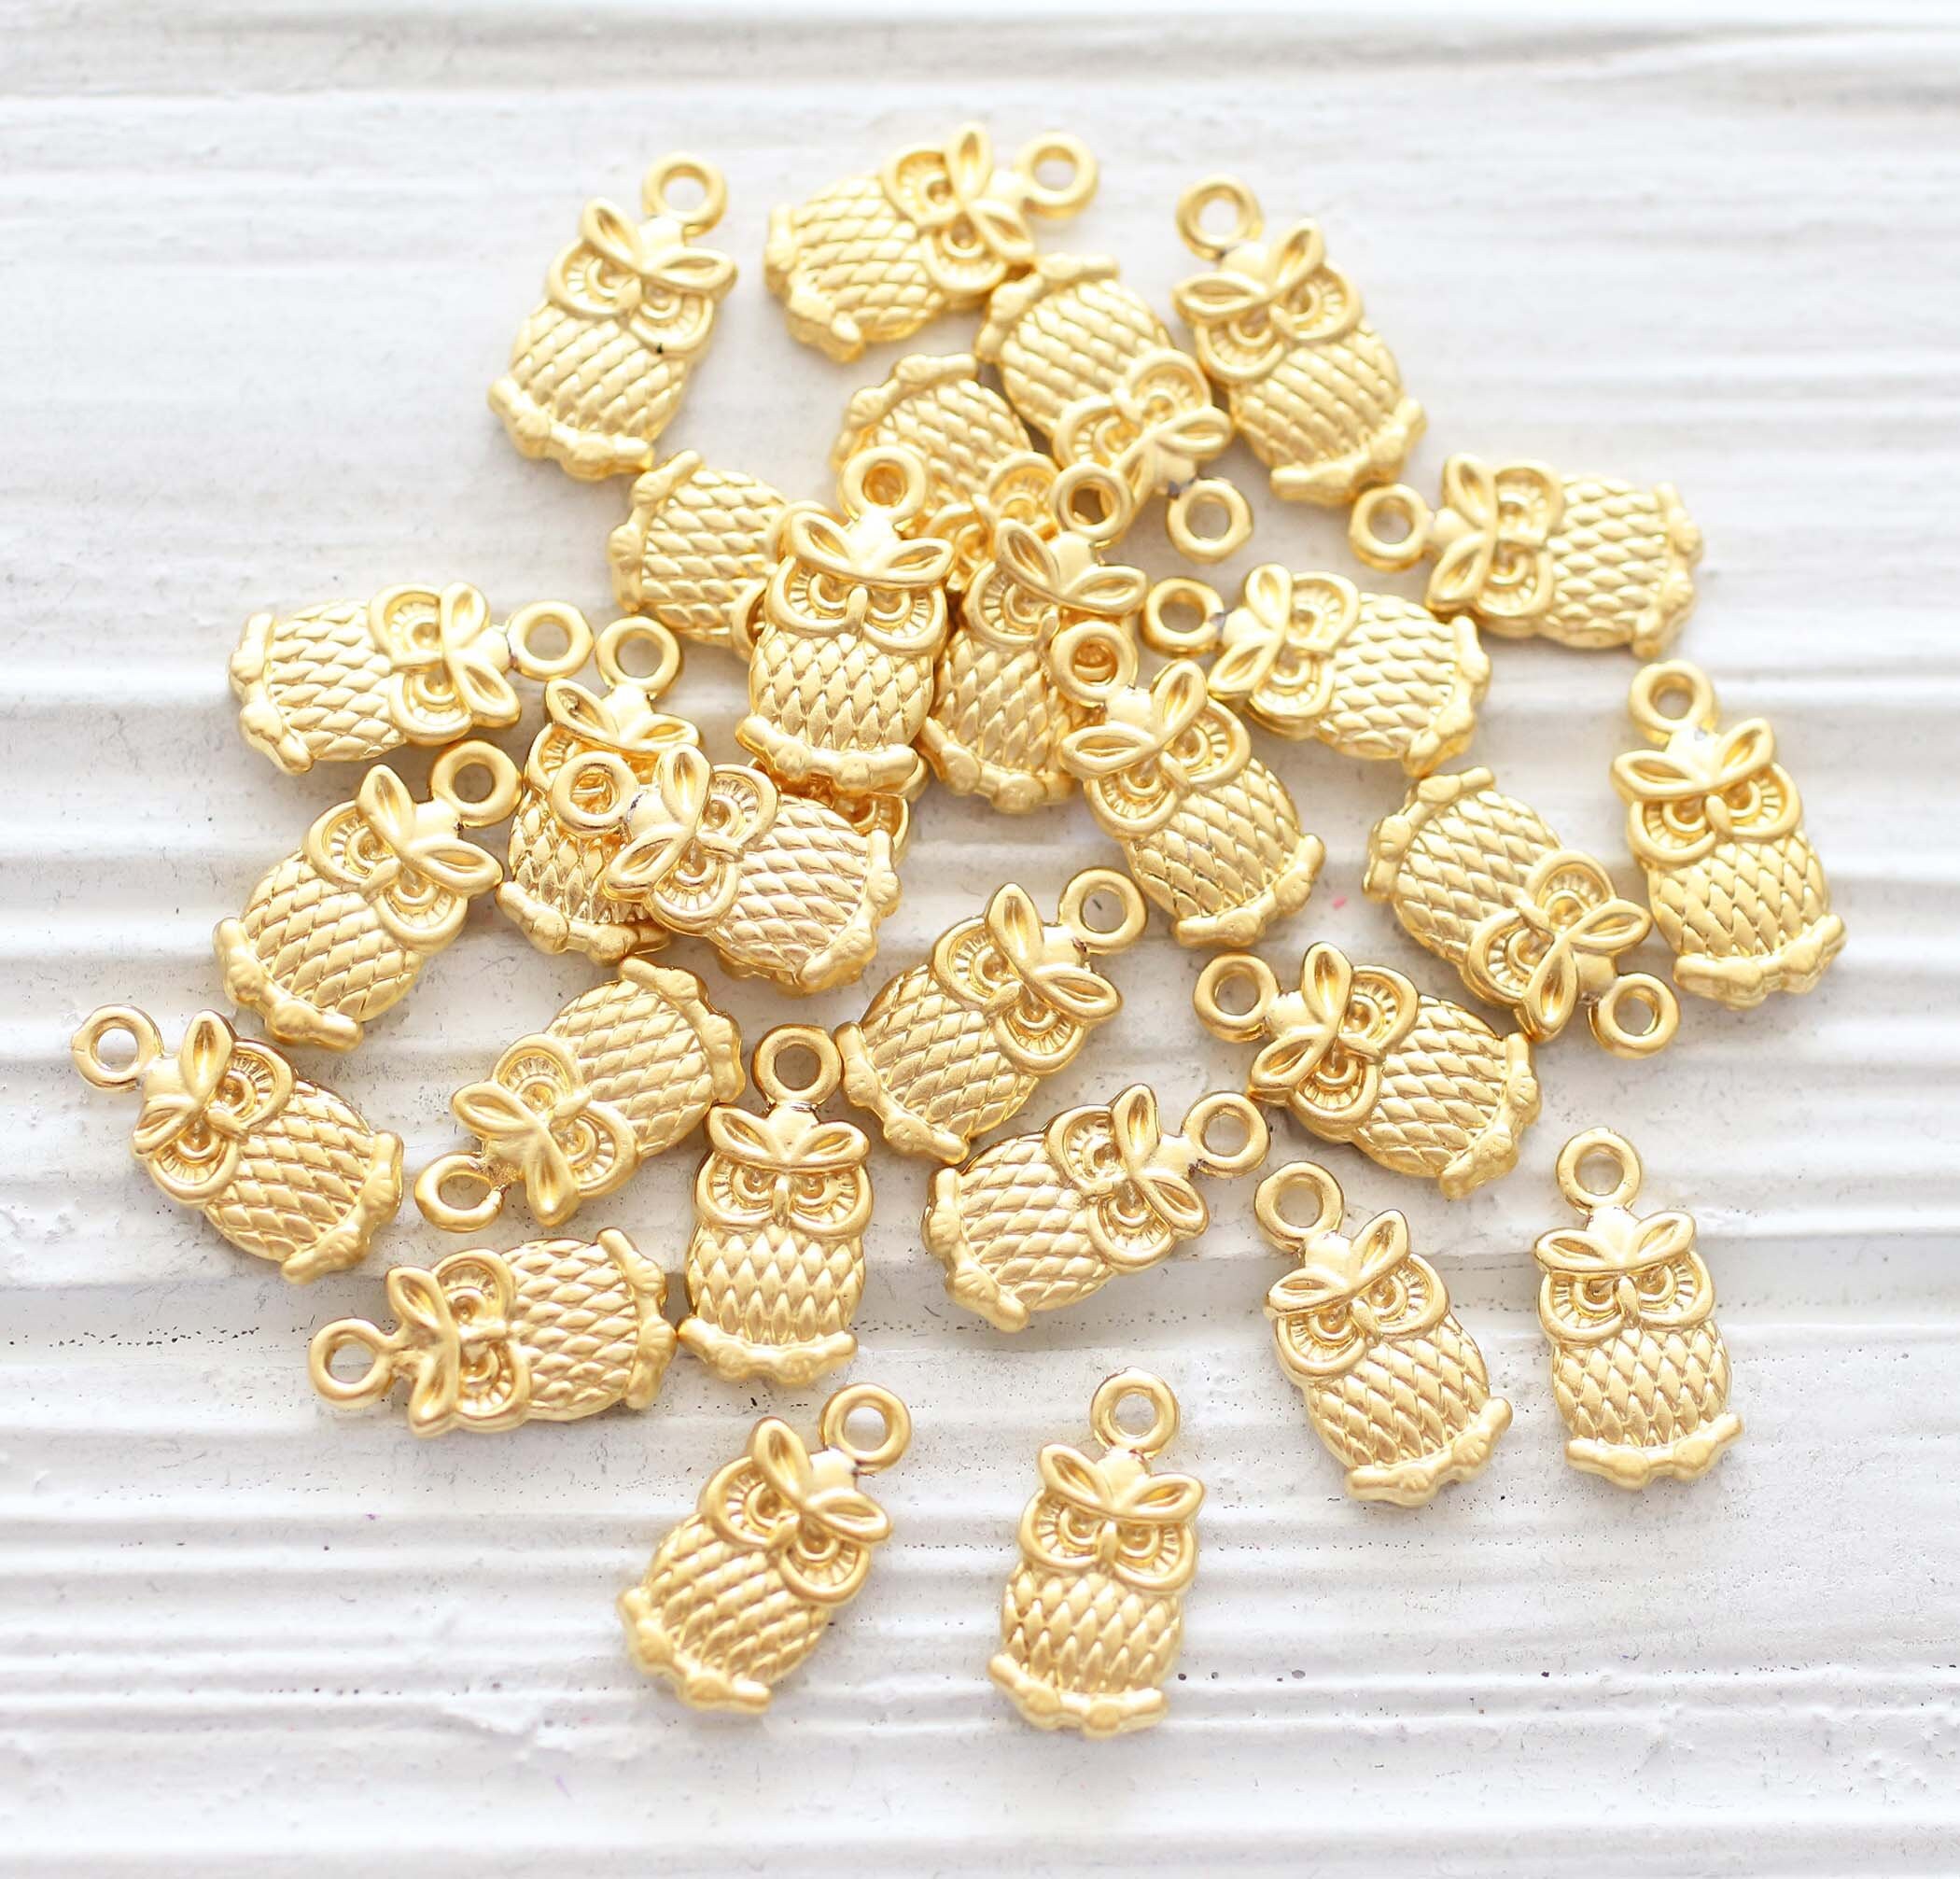 10pc gold stick charms, earring charms, spike charm, gold metal